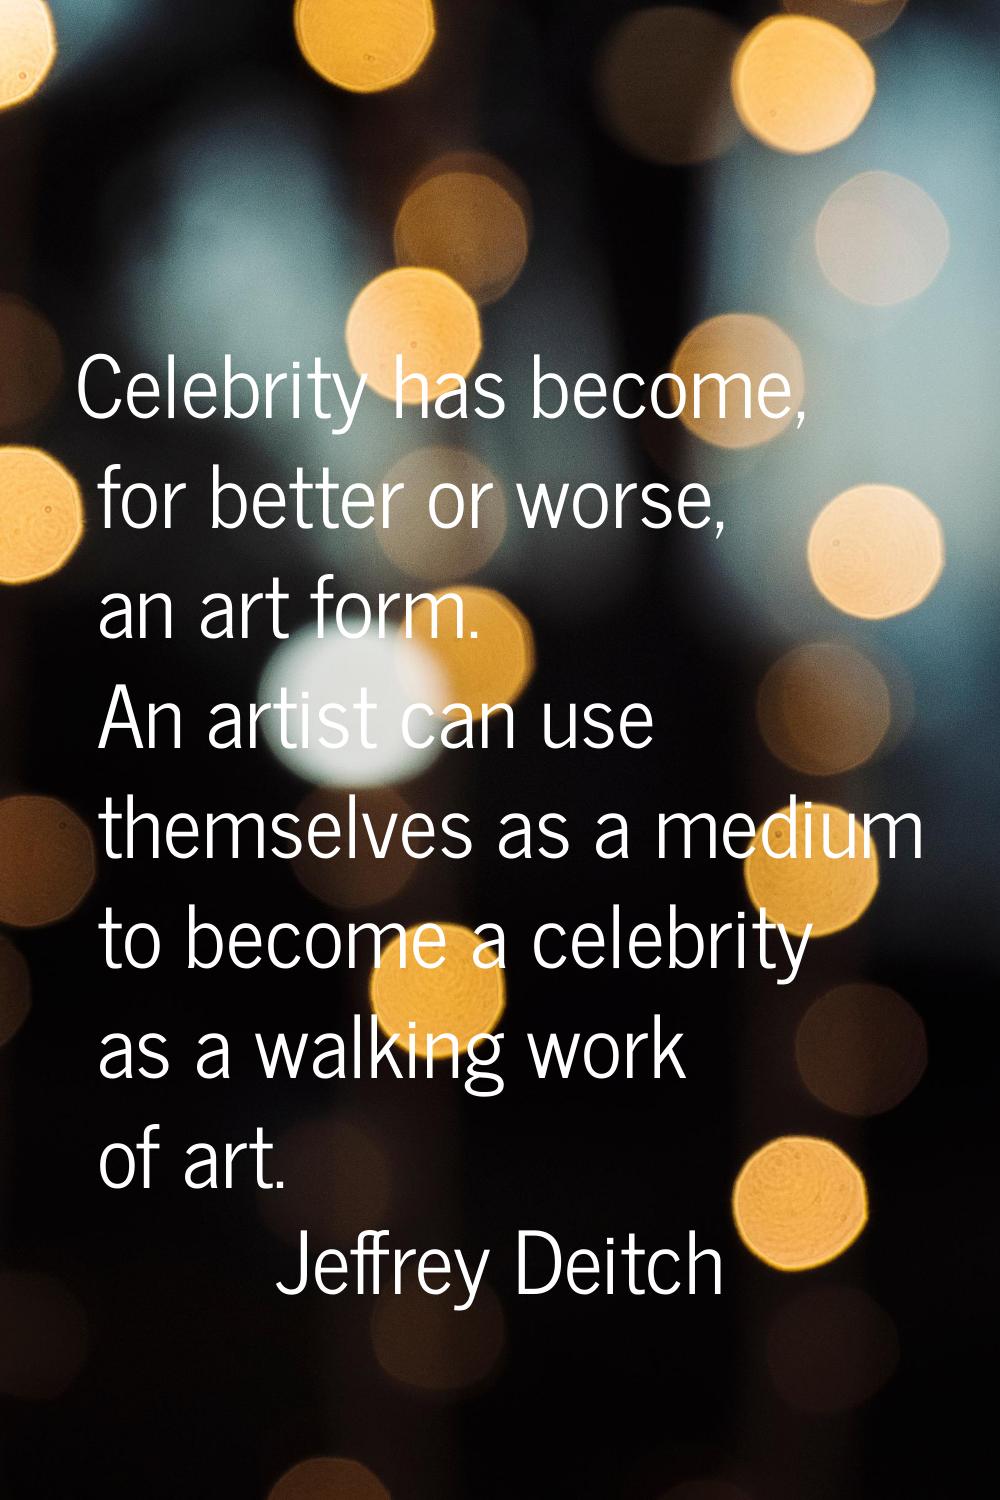 Celebrity has become, for better or worse, an art form. An artist can use themselves as a medium to